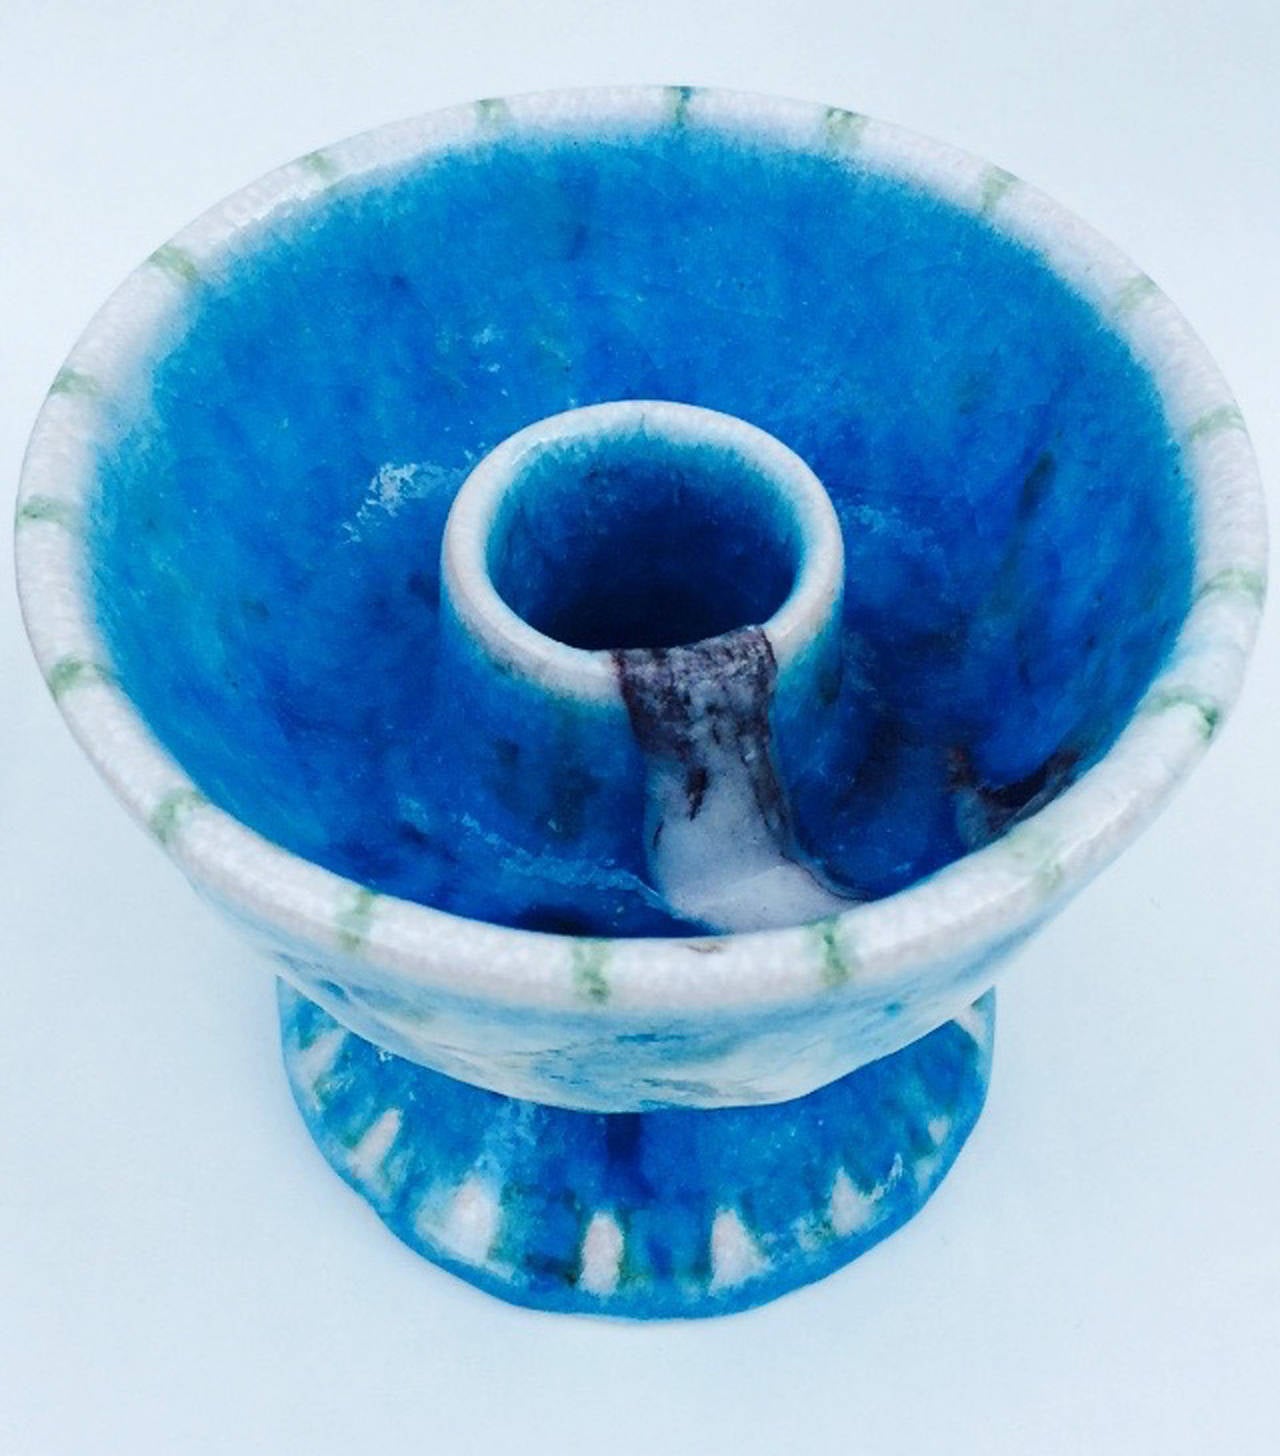 A fine Guido Gambone ceramic candlestick. Signed item features a vibrant blue, white, black ceramic glaze. Excellent with no issues.